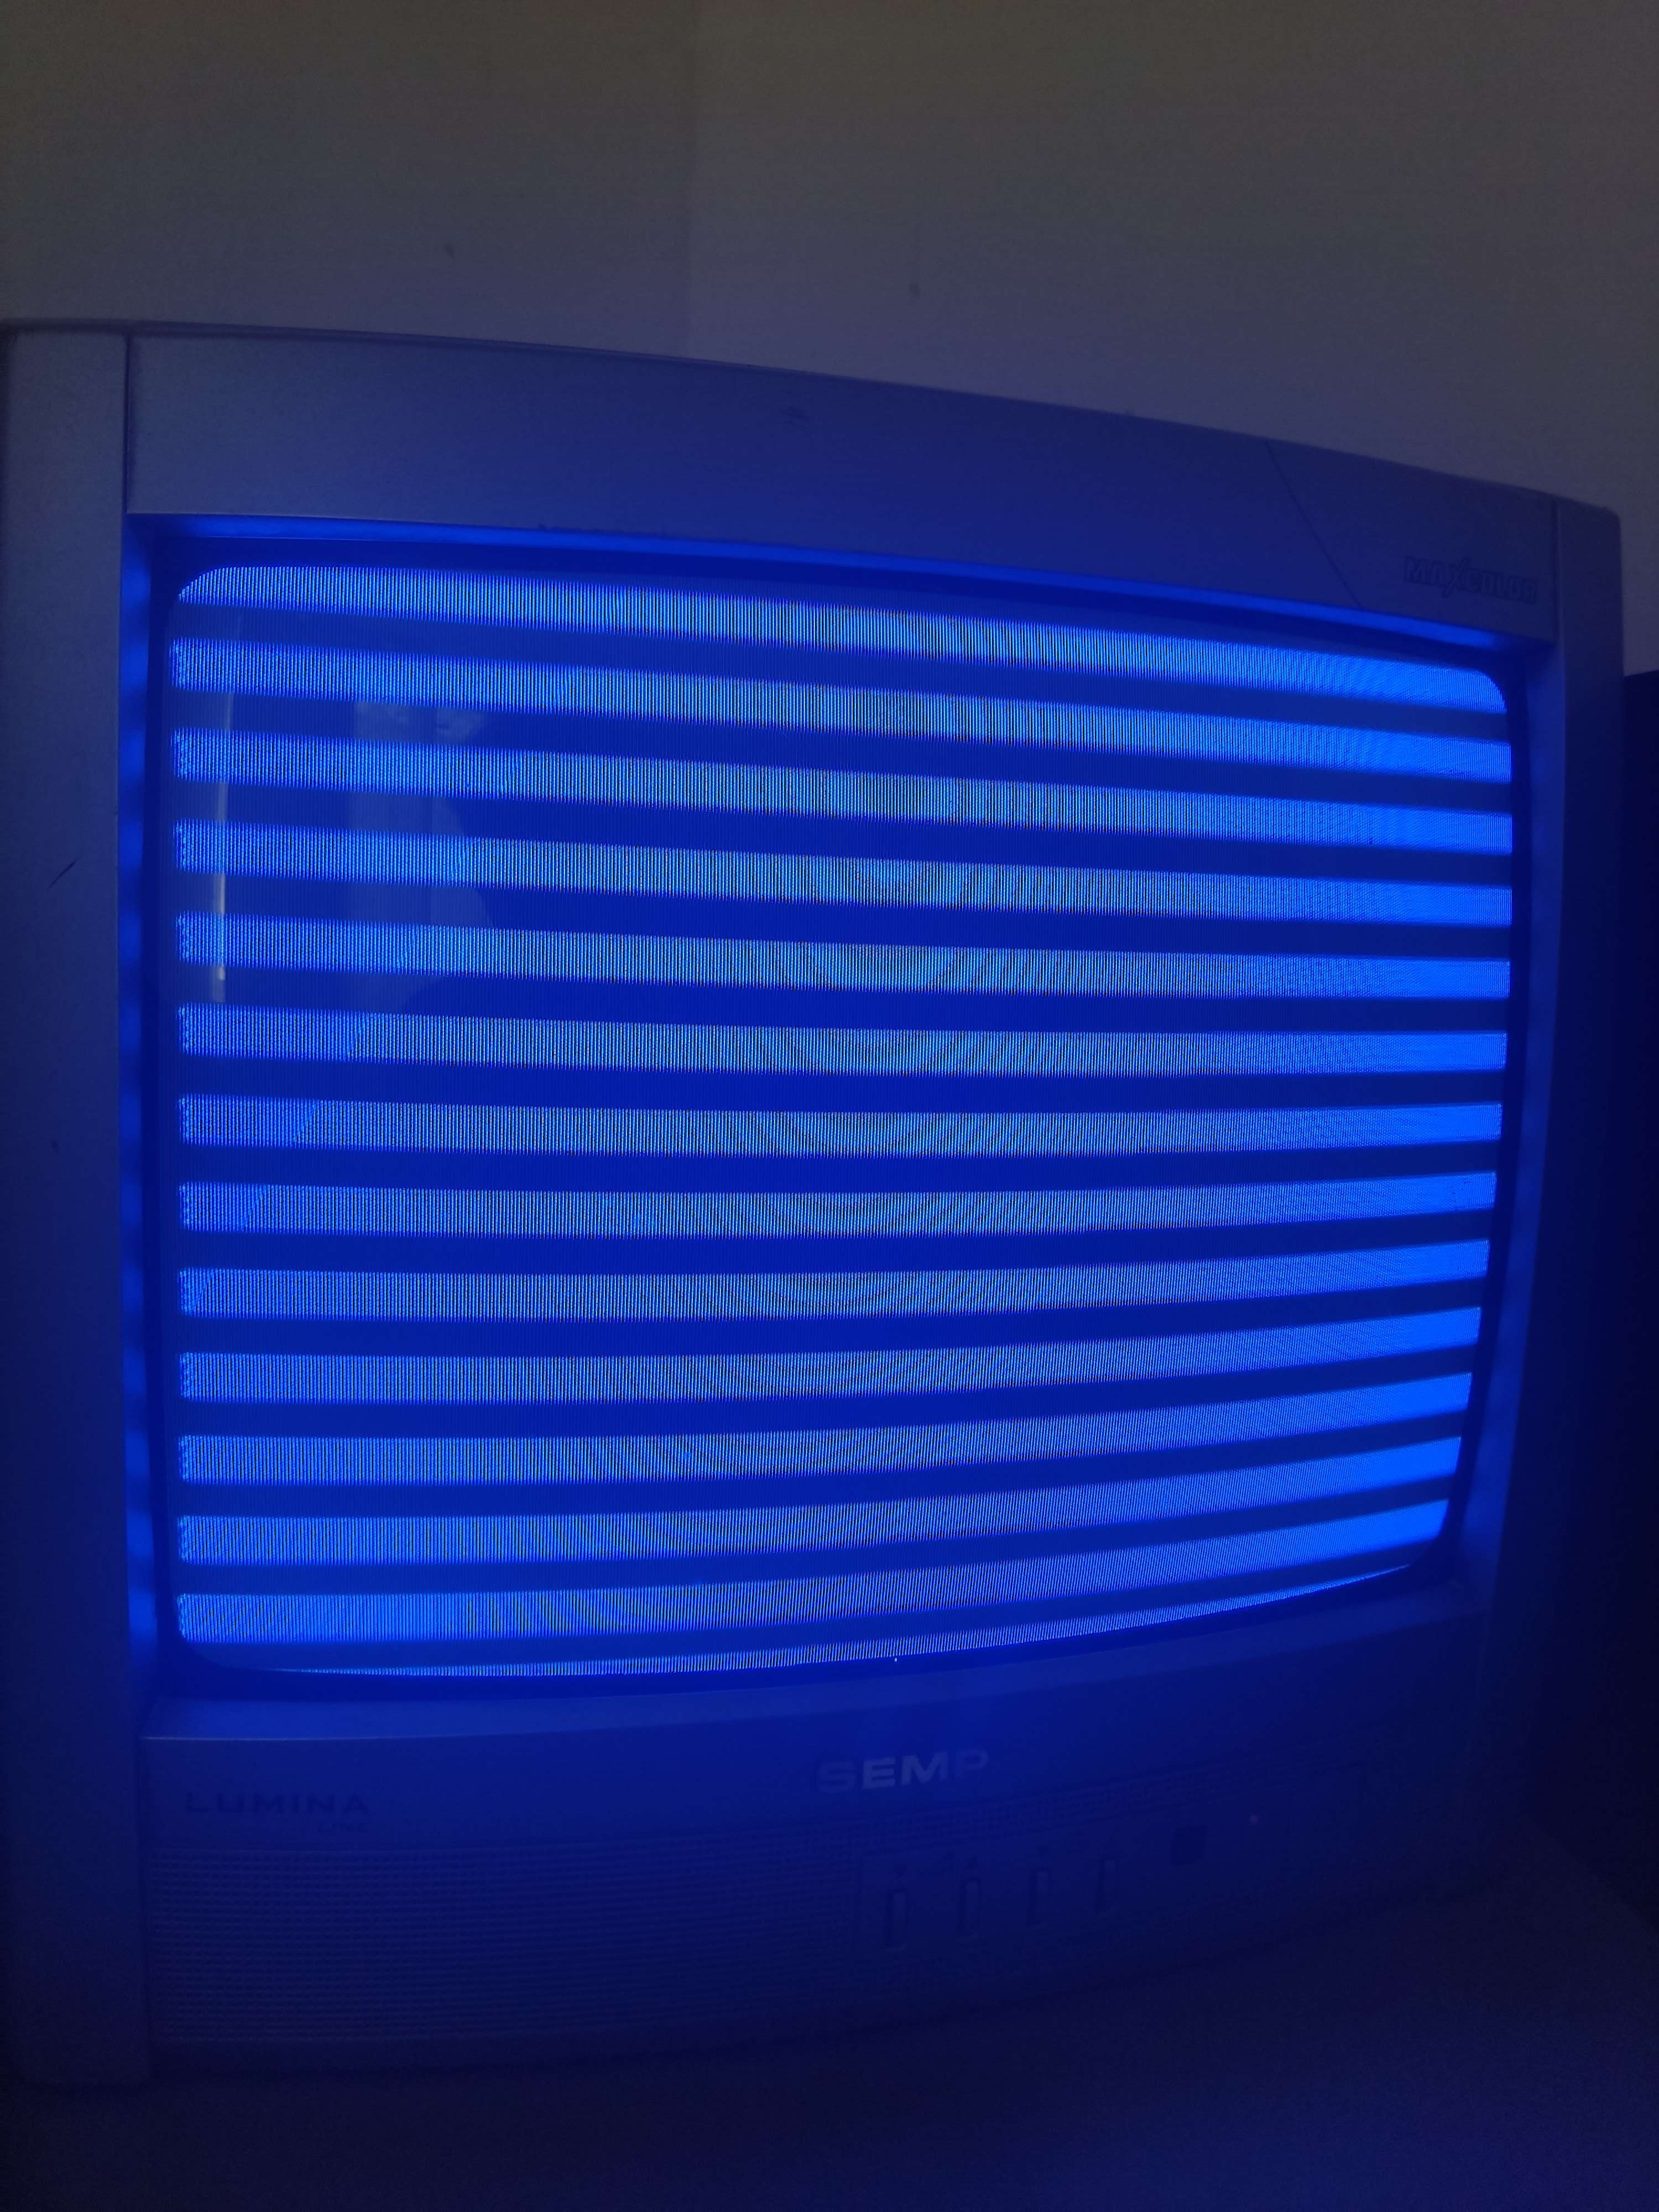 An image of a CRT TV with blue and black horizontal stripes.